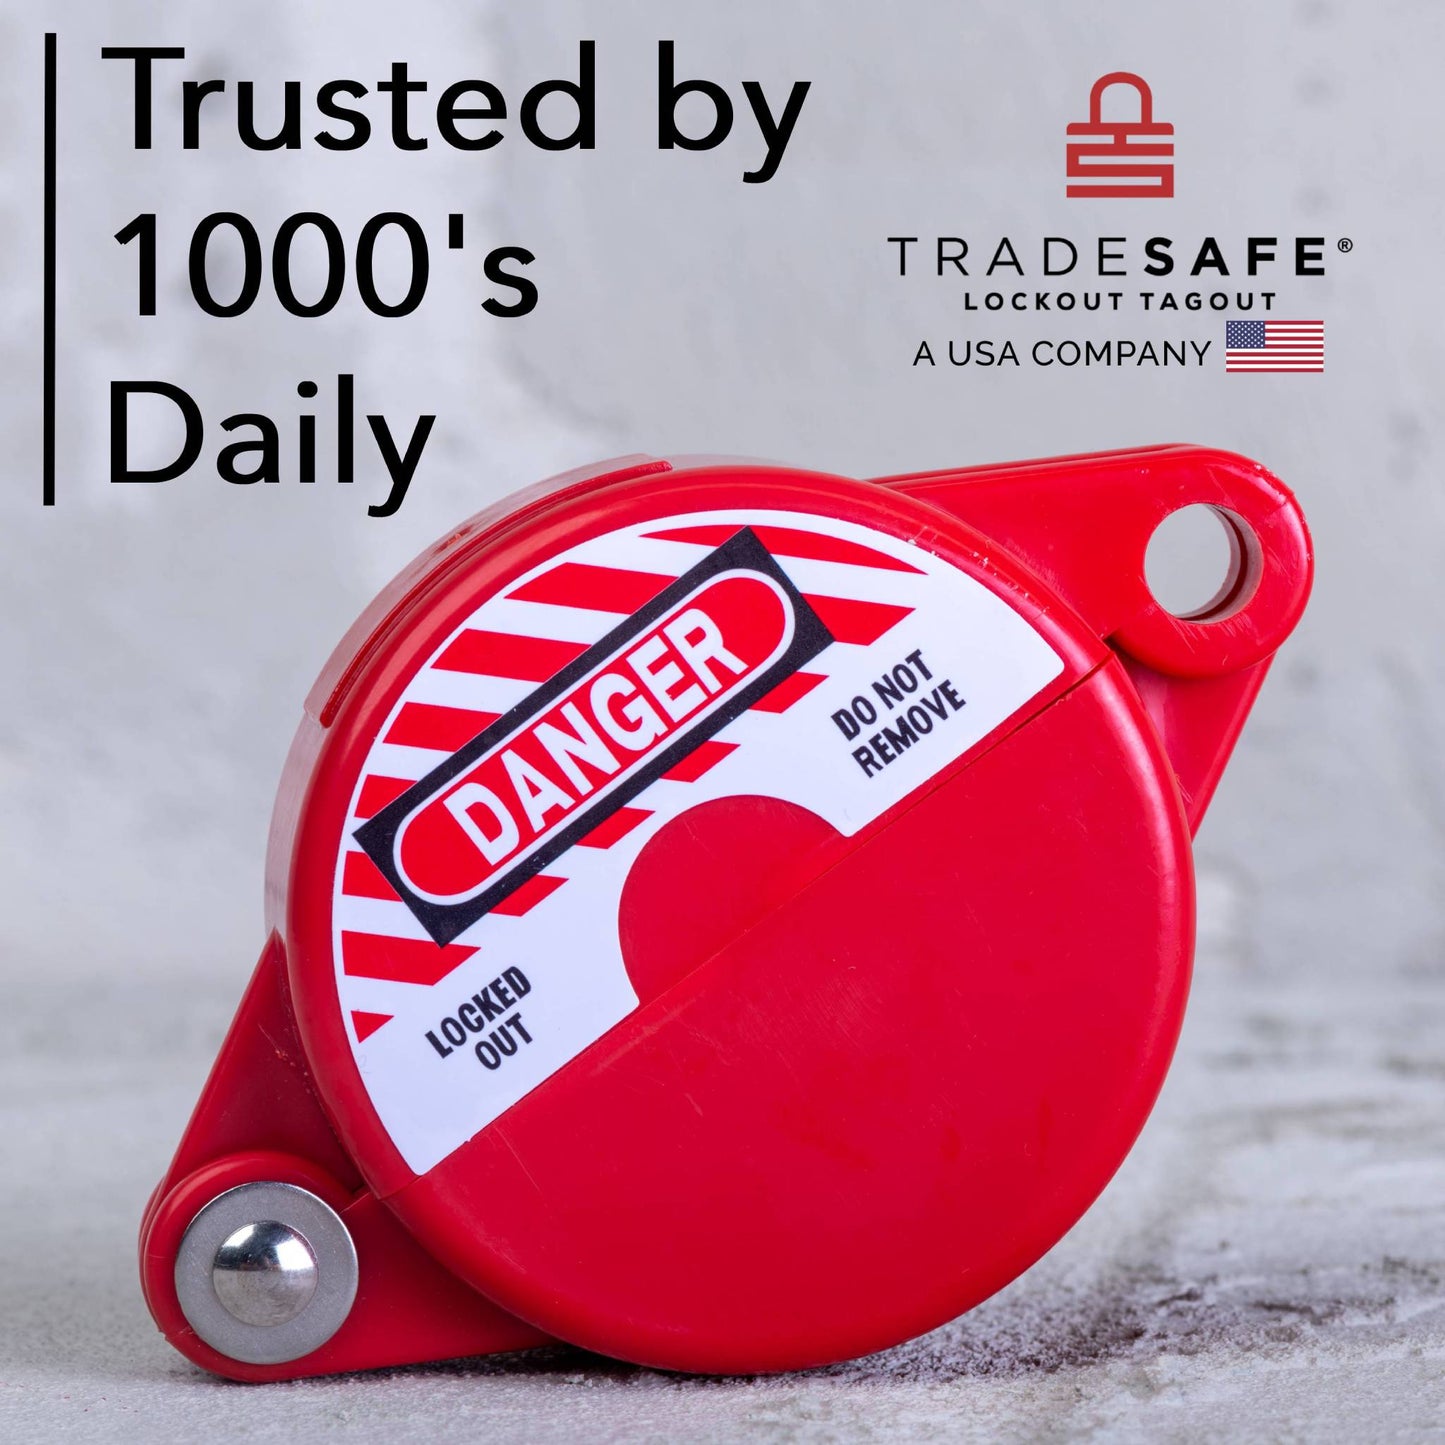 lockout tagout gate valve brand image with text "trusted by 1000s daily."